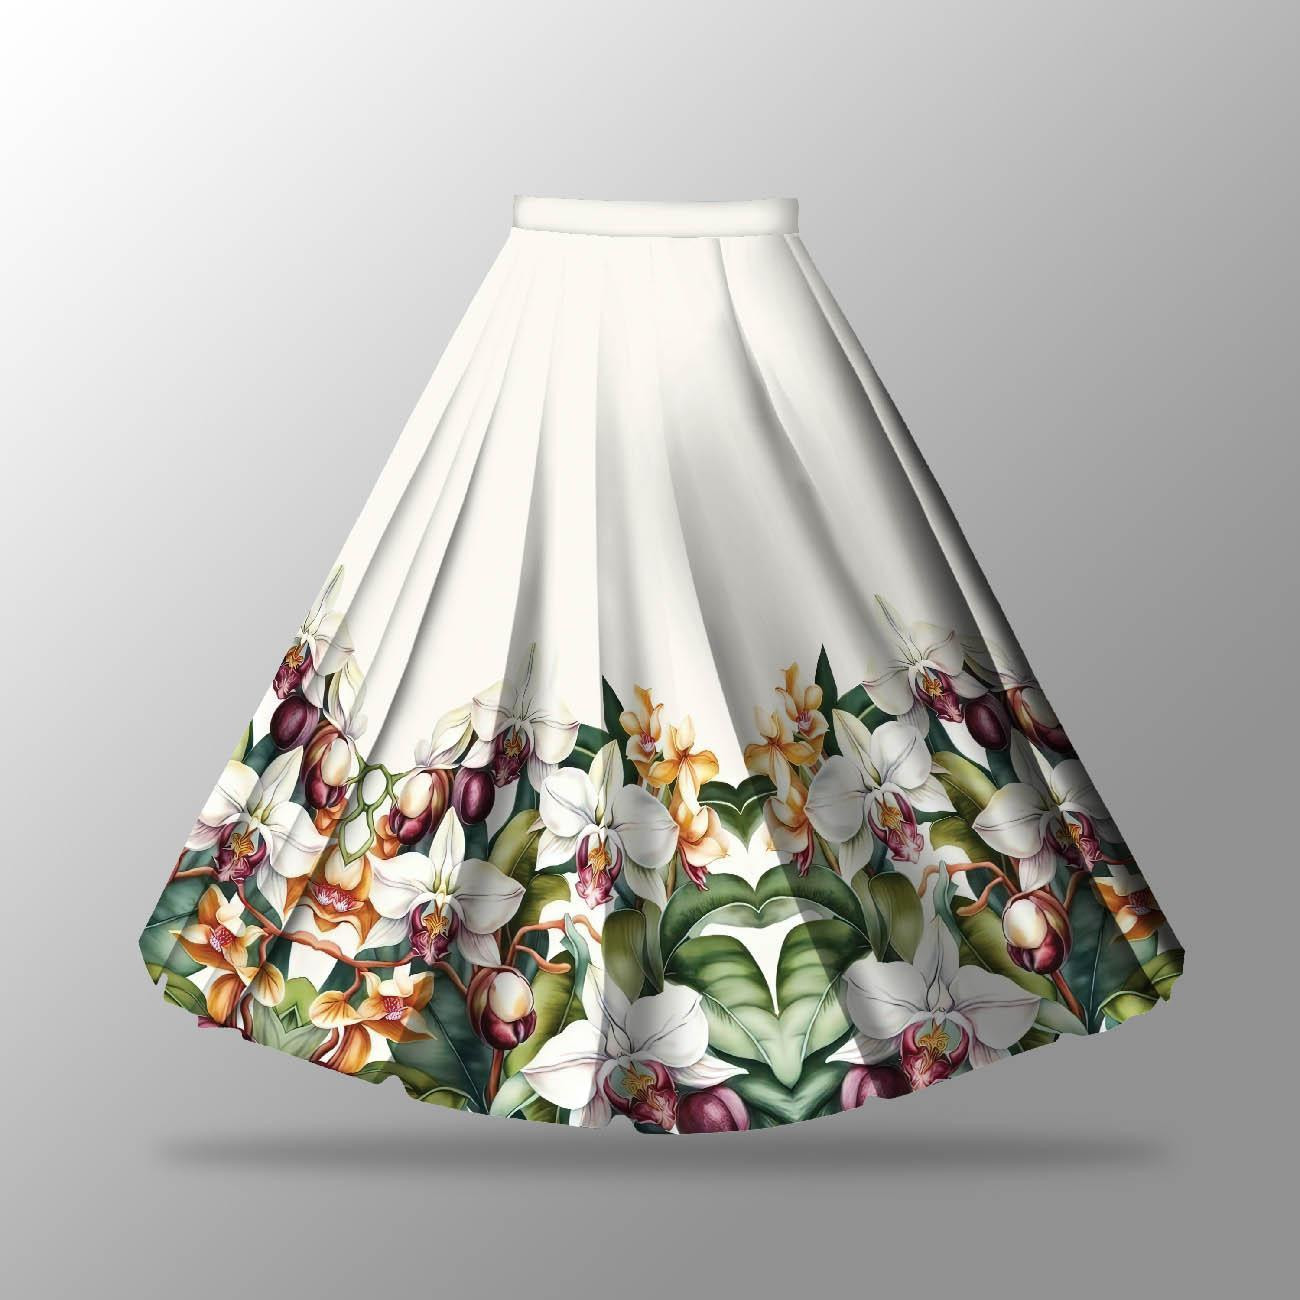 EXOTIC ORCHIDS pat. 2 - skirt panel "MAXI"